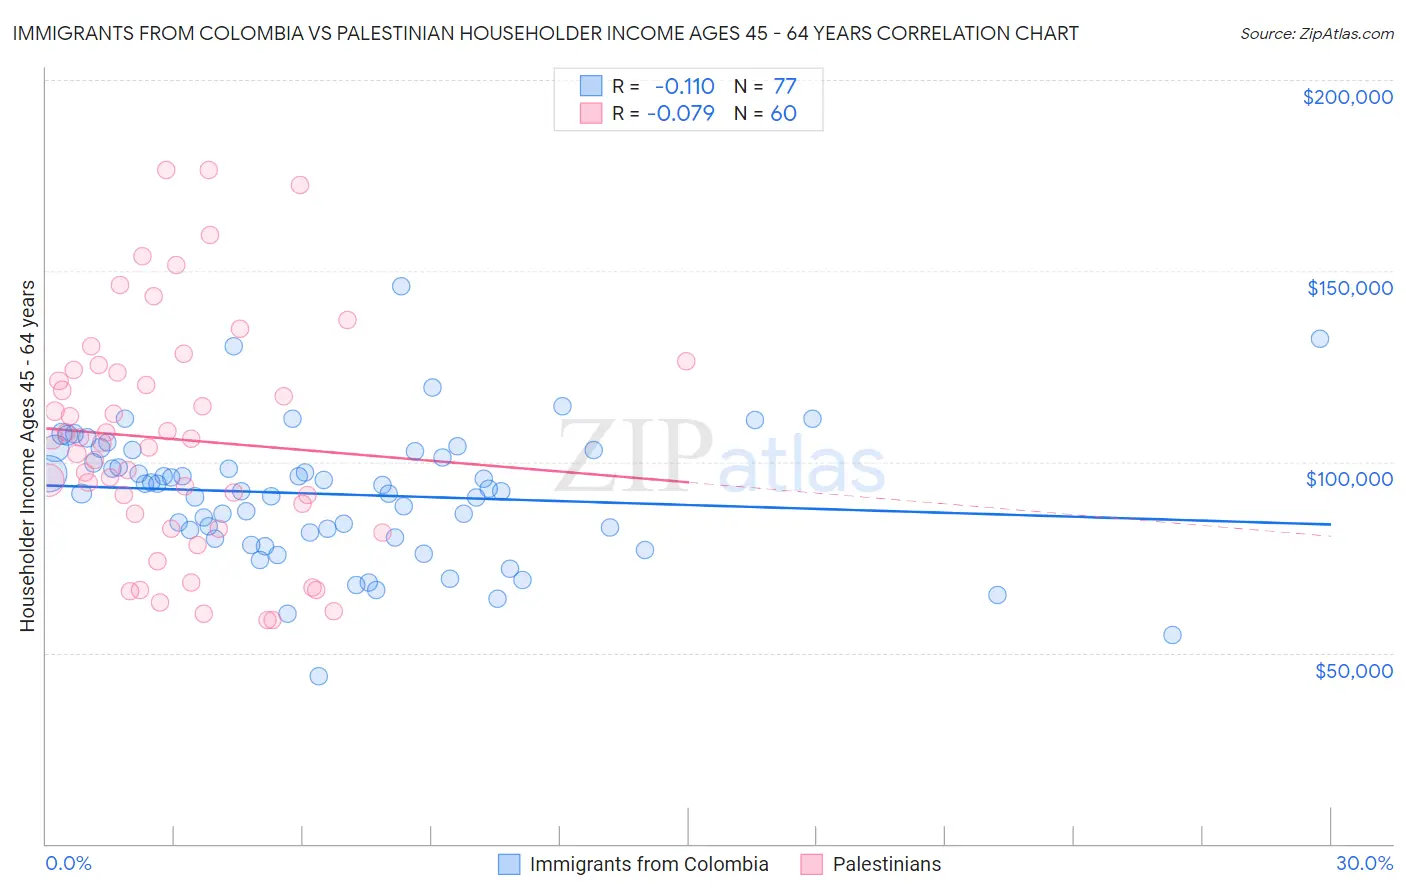 Immigrants from Colombia vs Palestinian Householder Income Ages 45 - 64 years